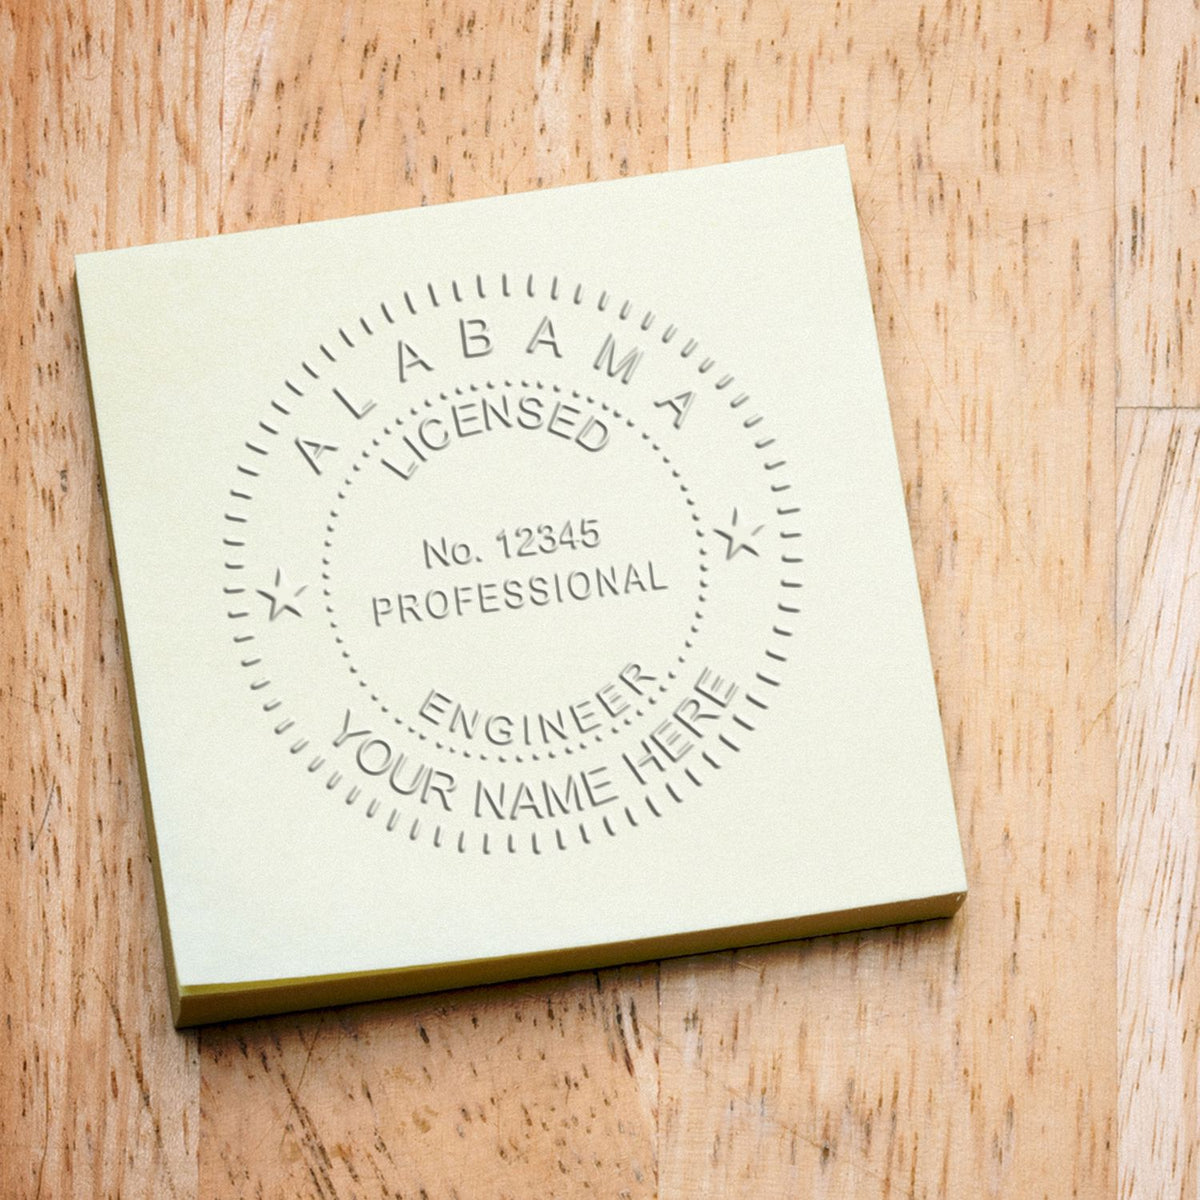 This paper is stamped with a sample imprint of the Alabama Engineer Desk Seal, signifying its quality and reliability.